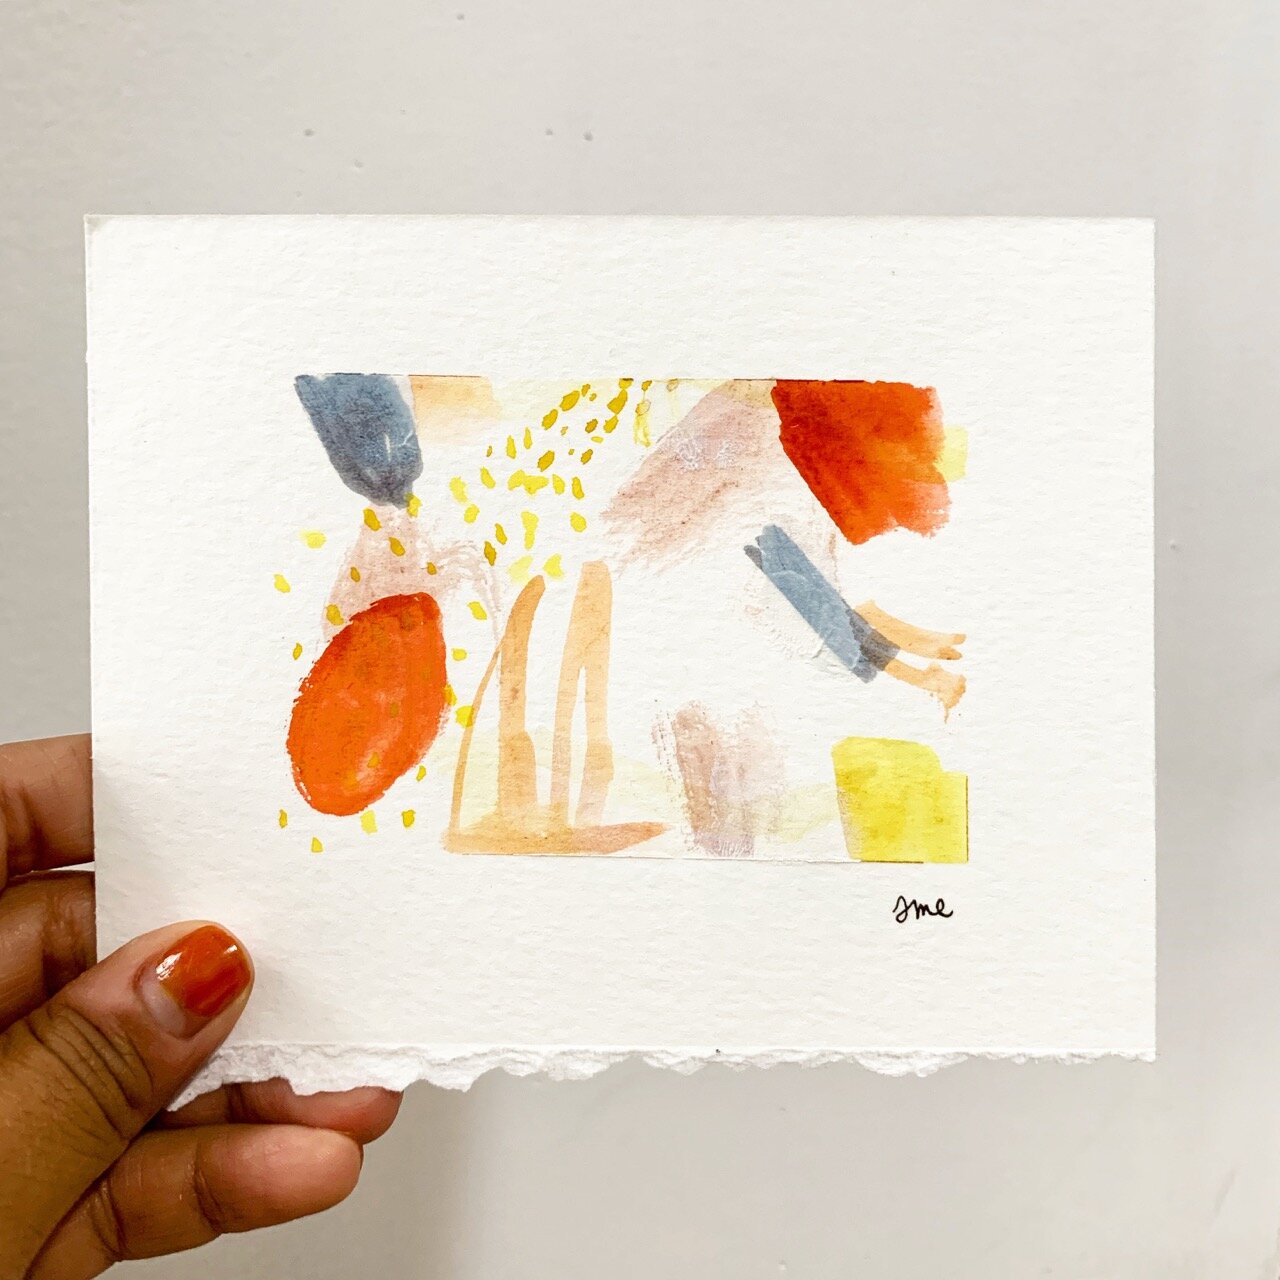 100 days abstract watercolor - 1 (2).jpg